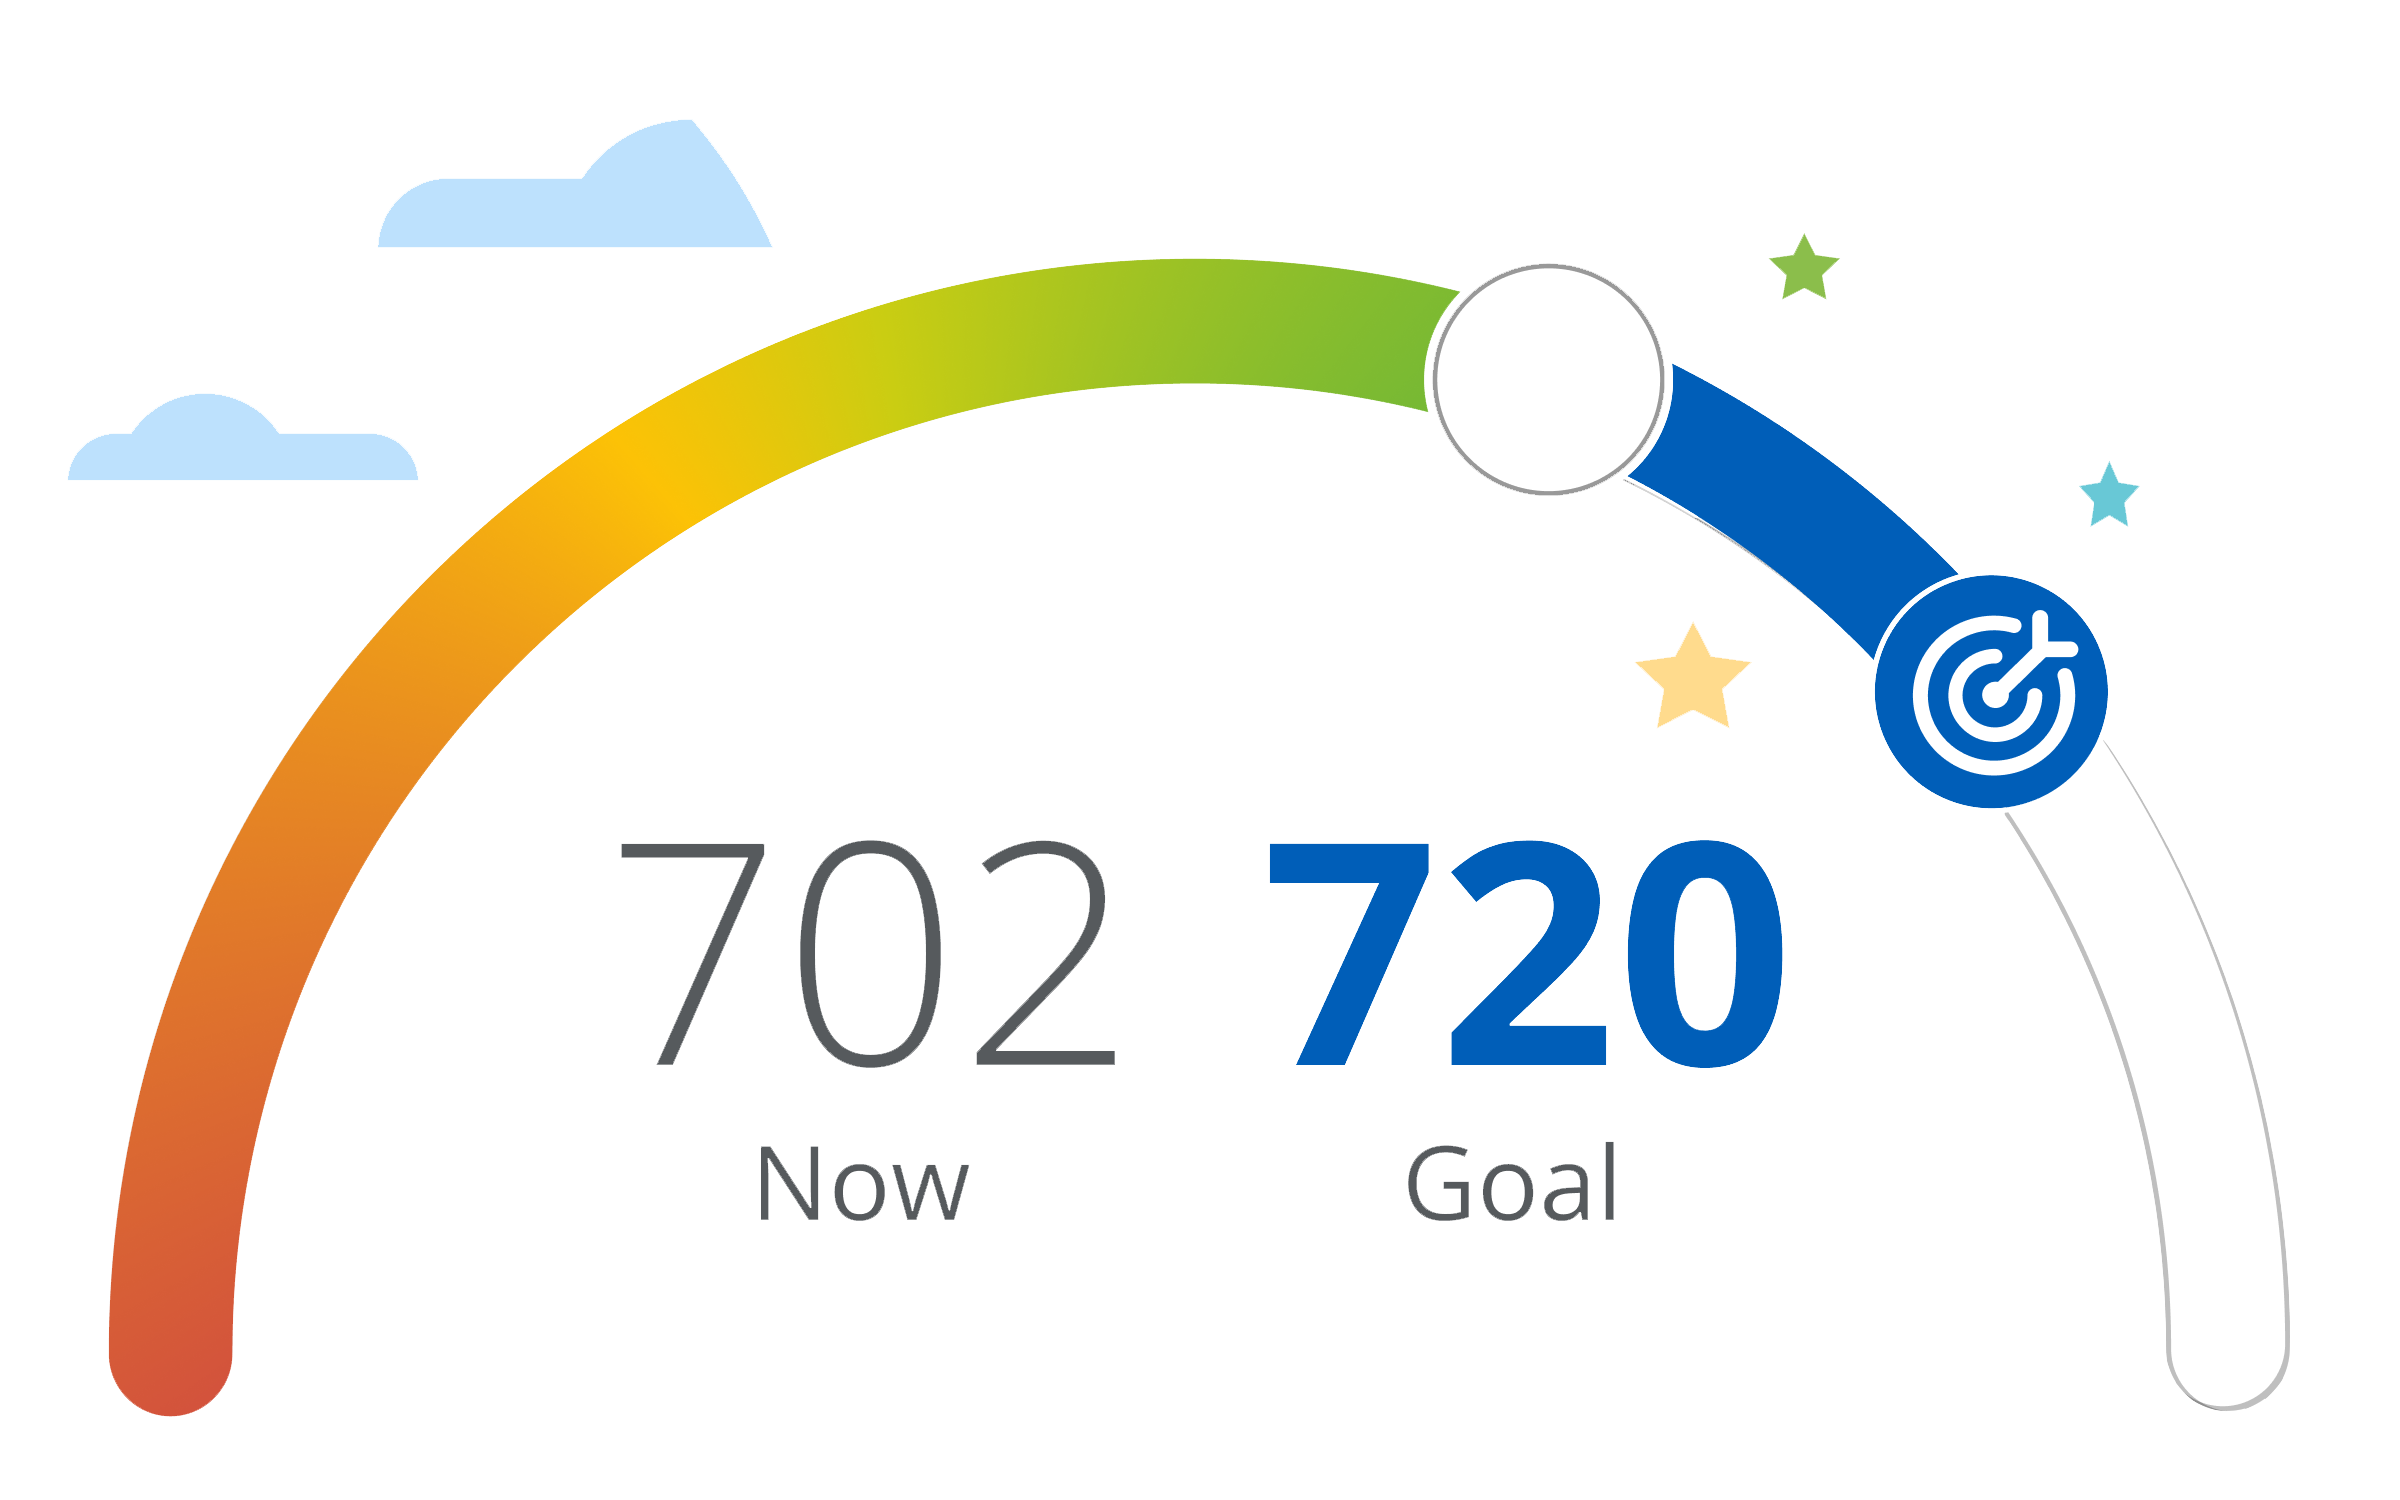 Improve your credit score from 702 to 720